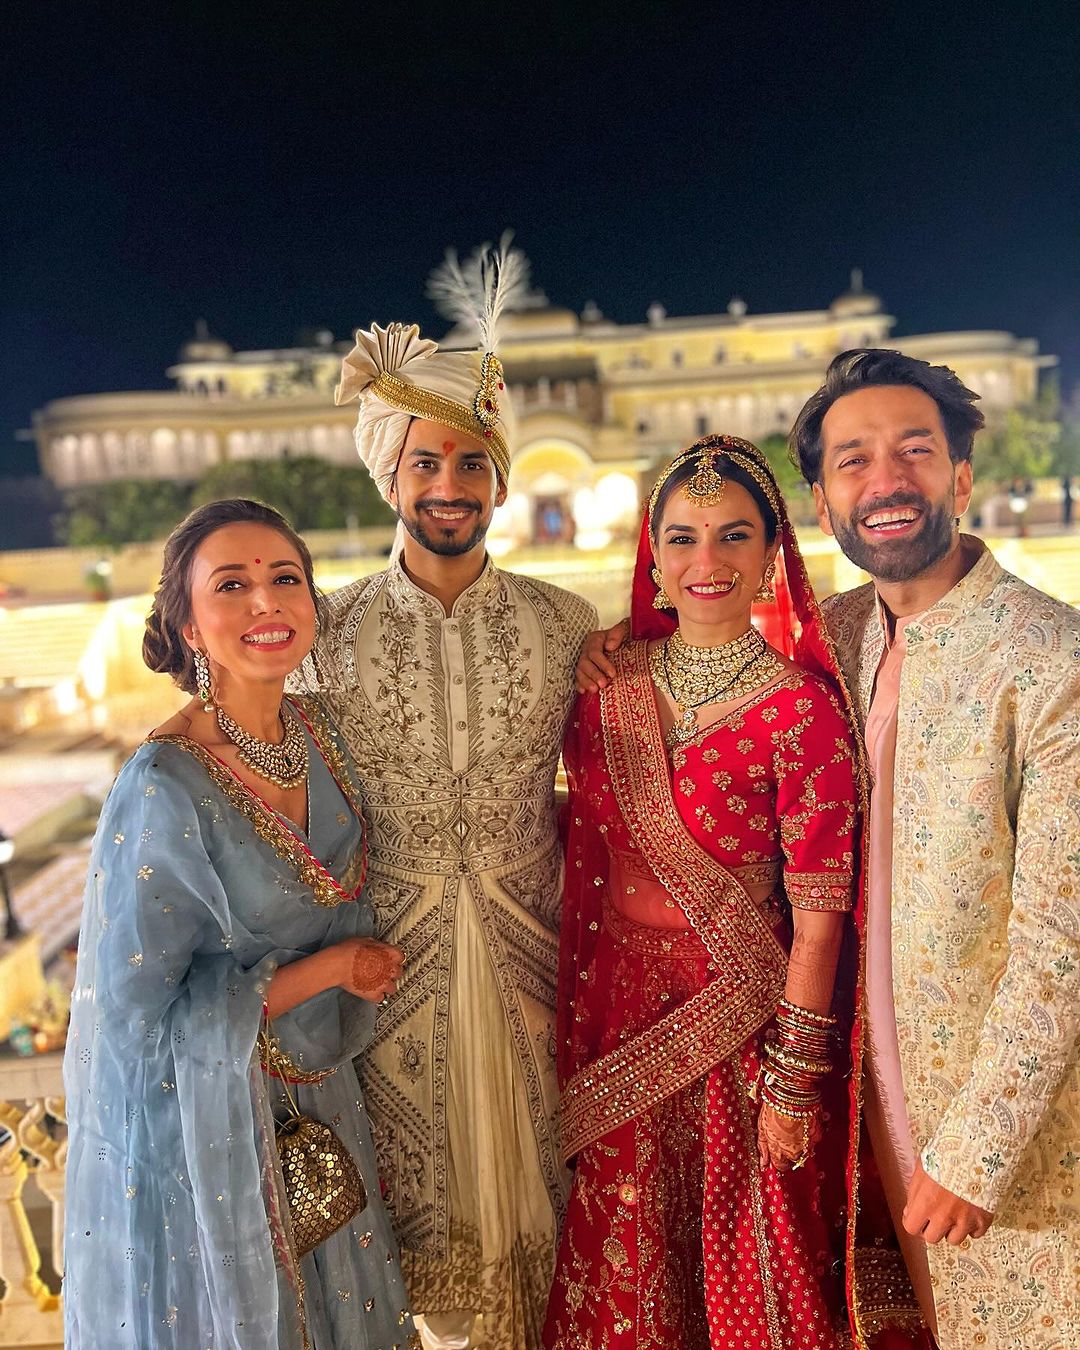 Most Talented Actor Nakuul Mehta Shared Pictures From Kashmira Irani’s Fairytale Wedding!